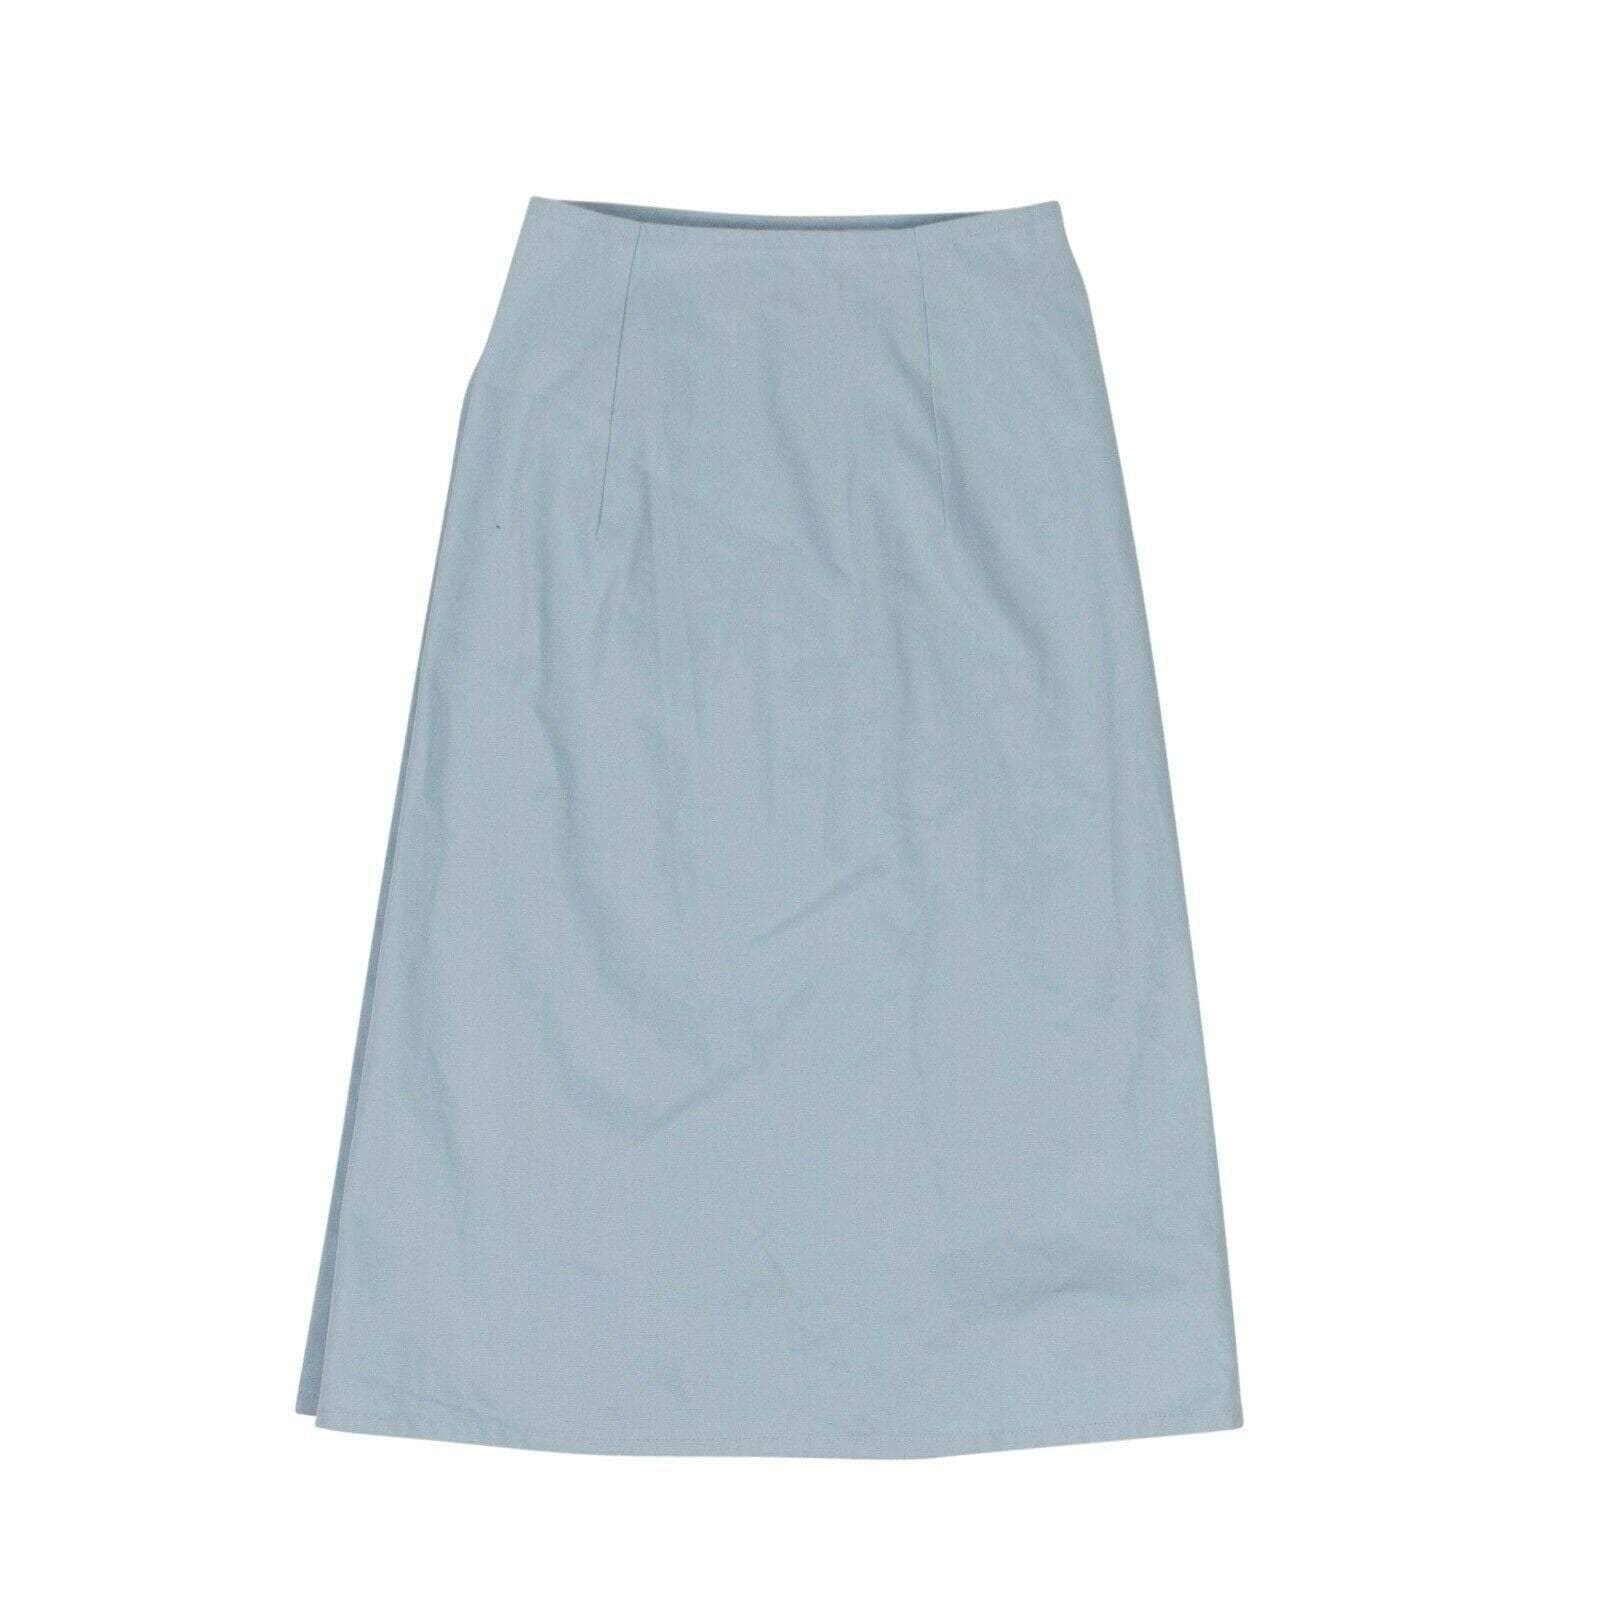 A_Plan_Application a_plan_application, chicmi, couponcollection, gender-womens, july4th, main-clothing, size-s, under-250, womens-a-line-skirts S Light Blue High-Waist Wrap Midi Skirt 74NGG-1004/S 74NGG-1004/S